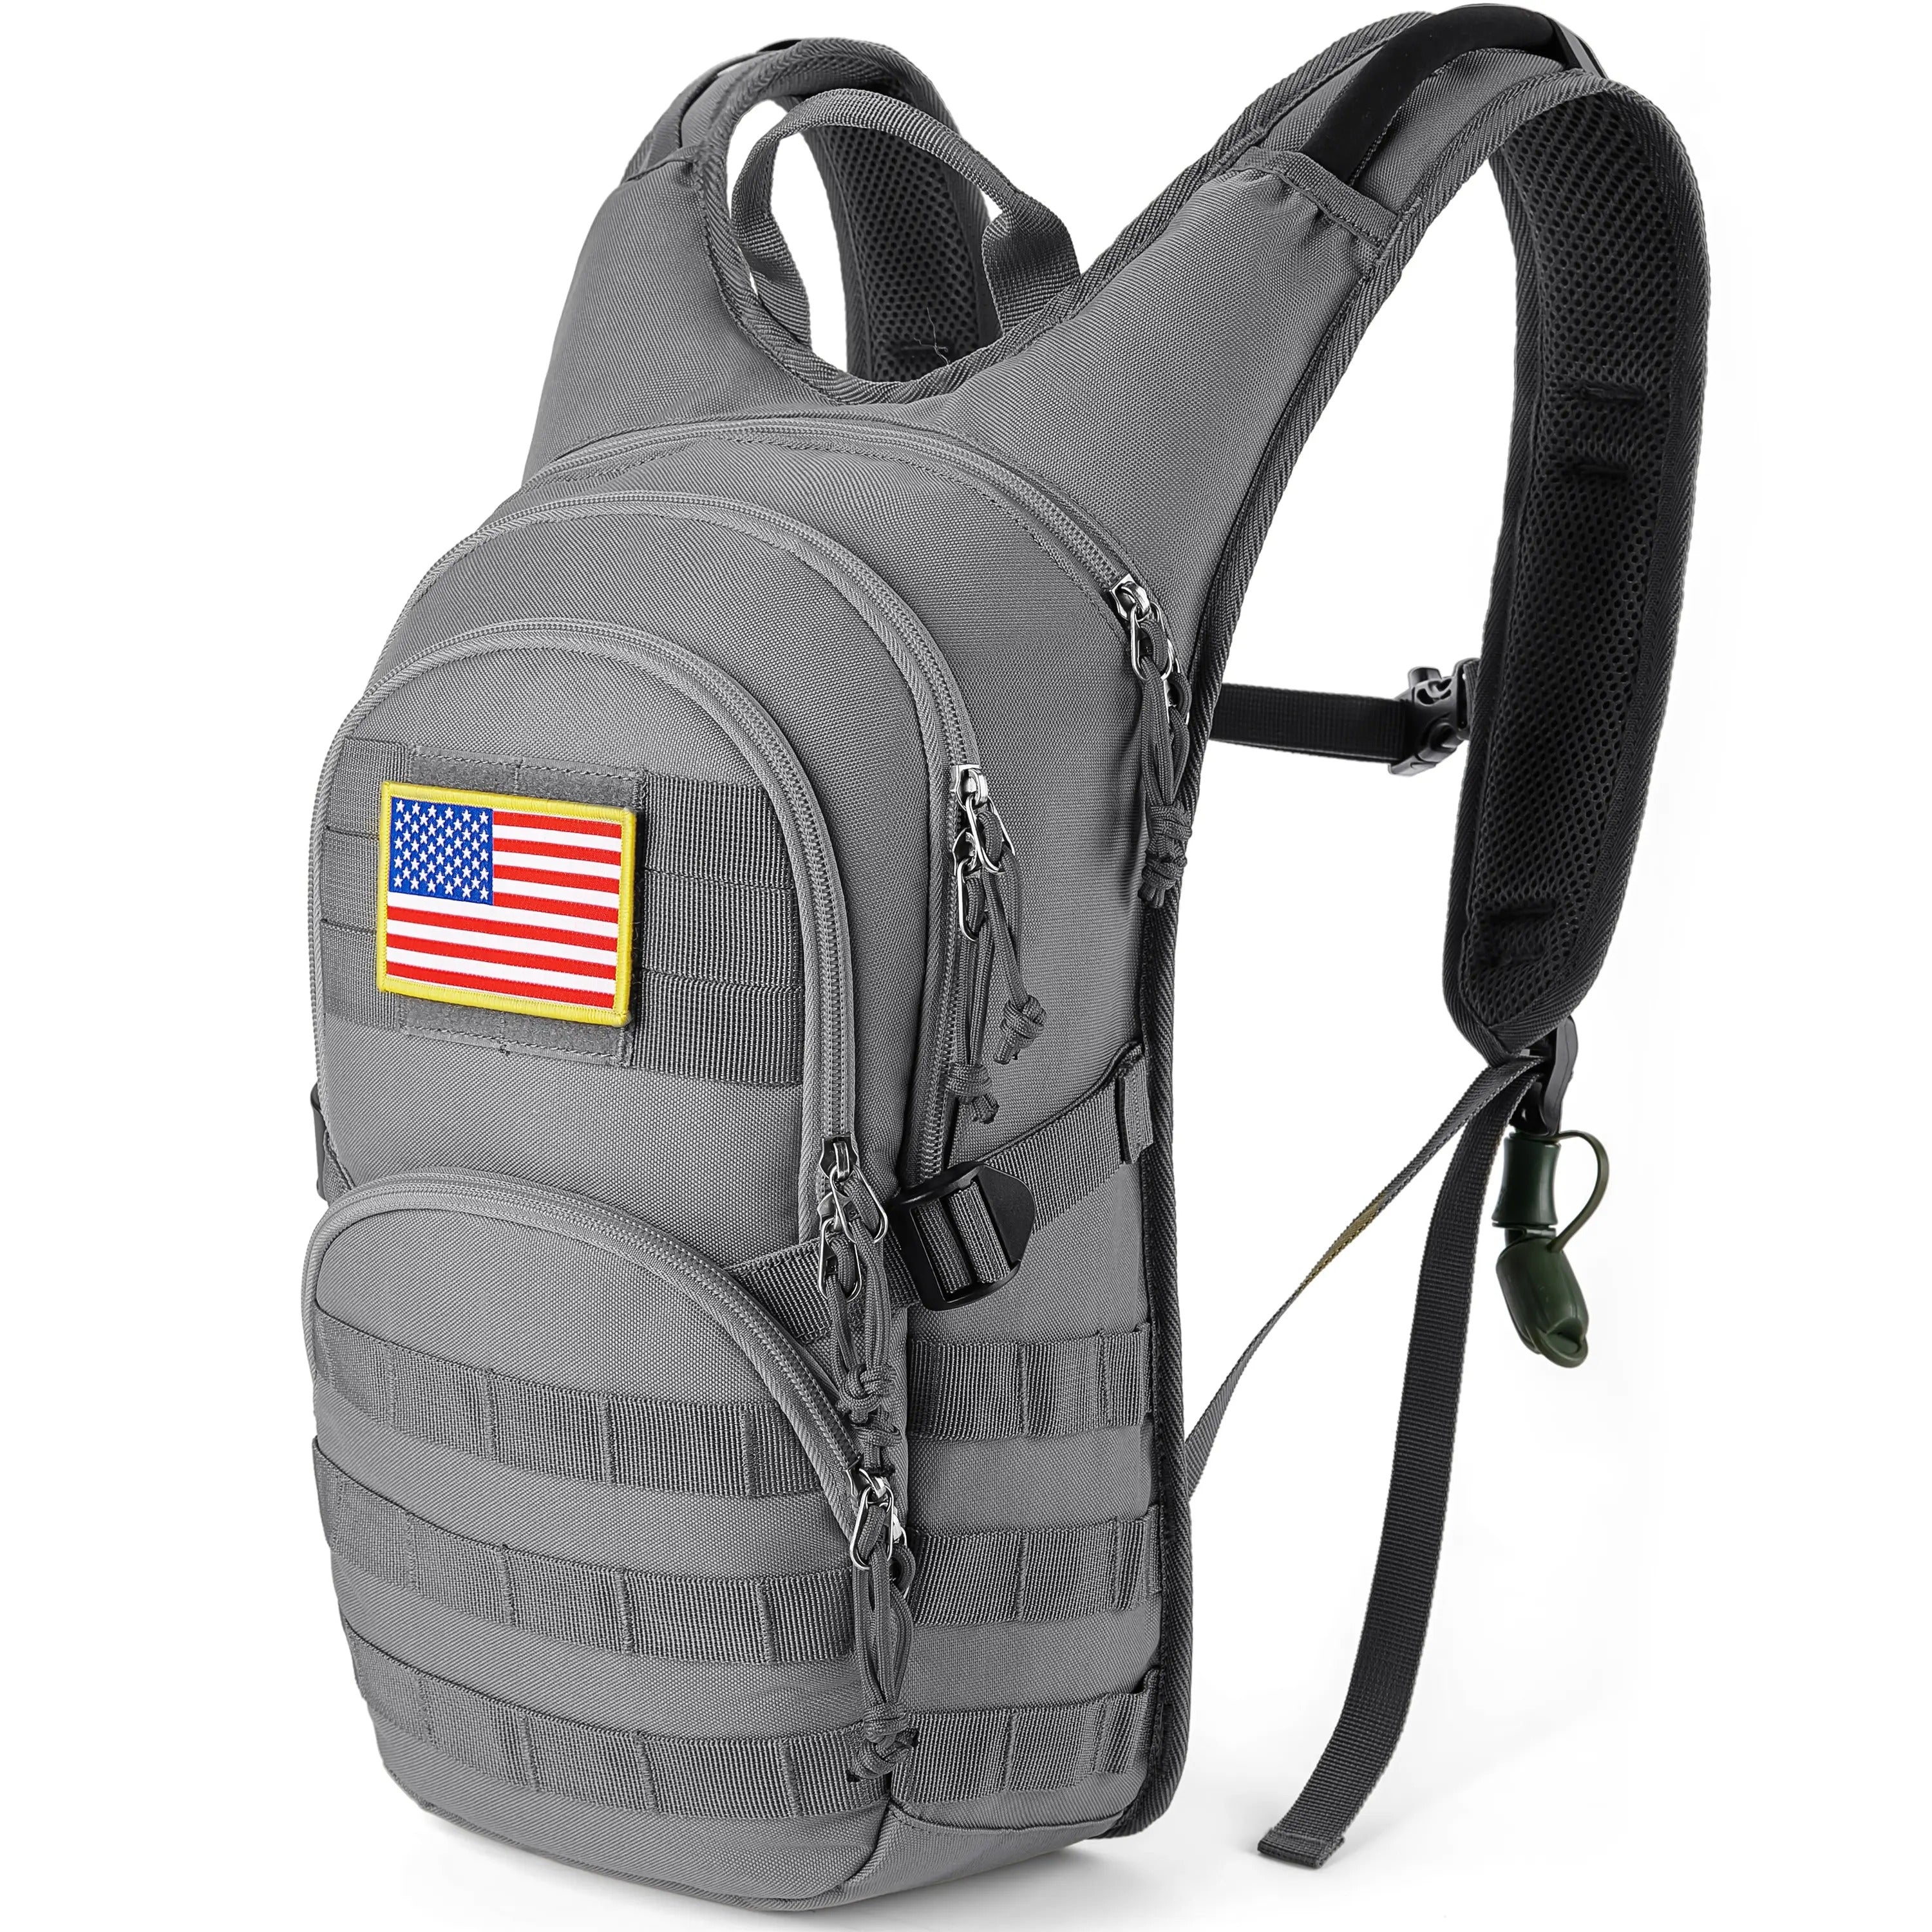 Running Hydration Backpack - Gray